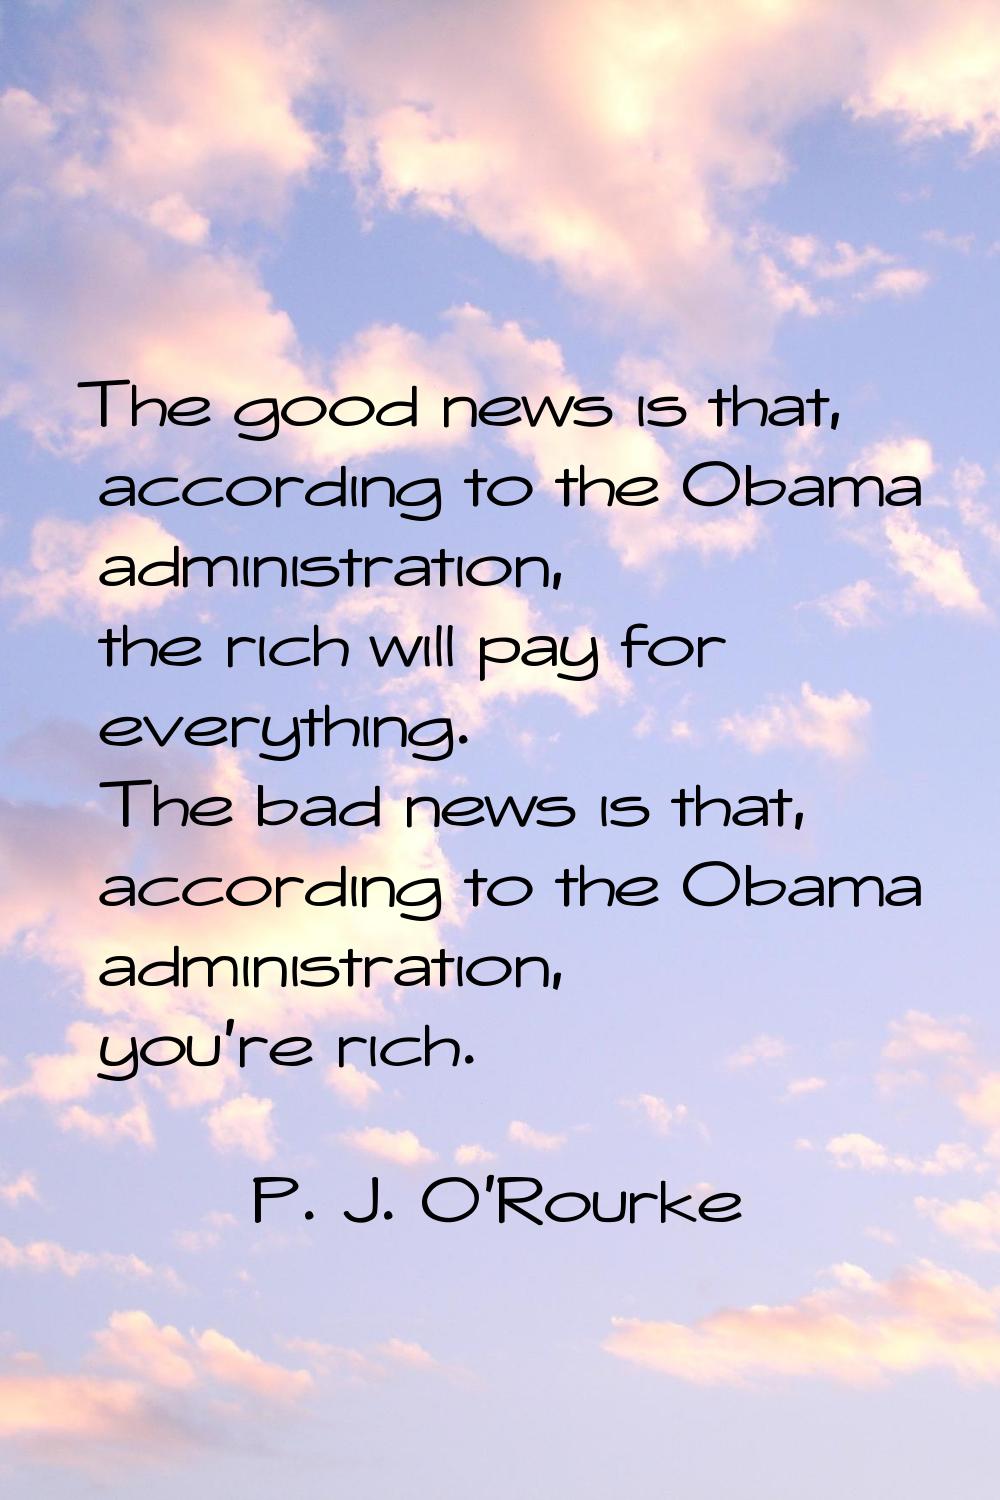 The good news is that, according to the Obama administration, the rich will pay for everything. The